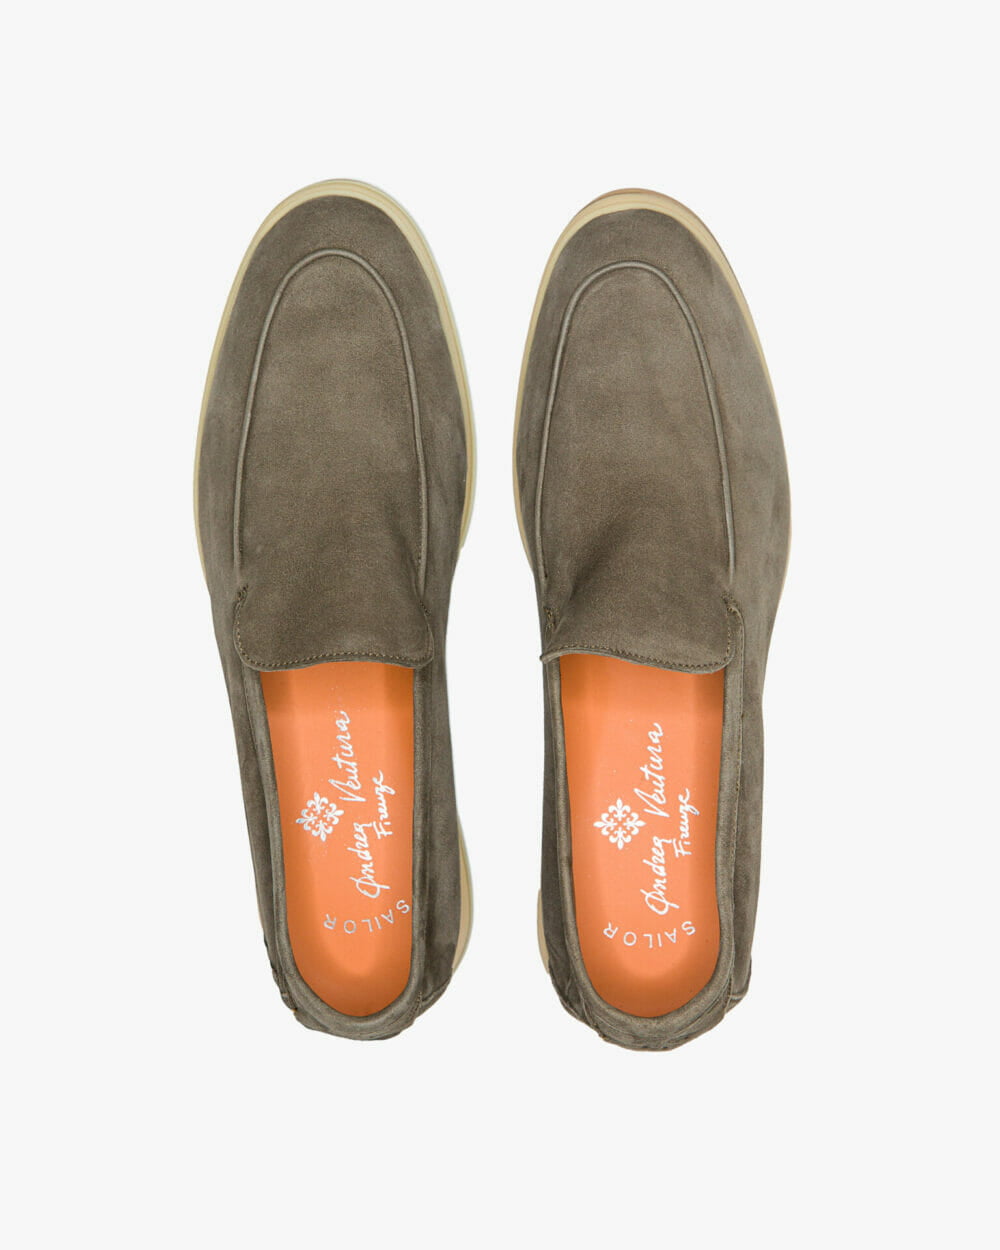 Aq-D-coast-mole-suede-from-above